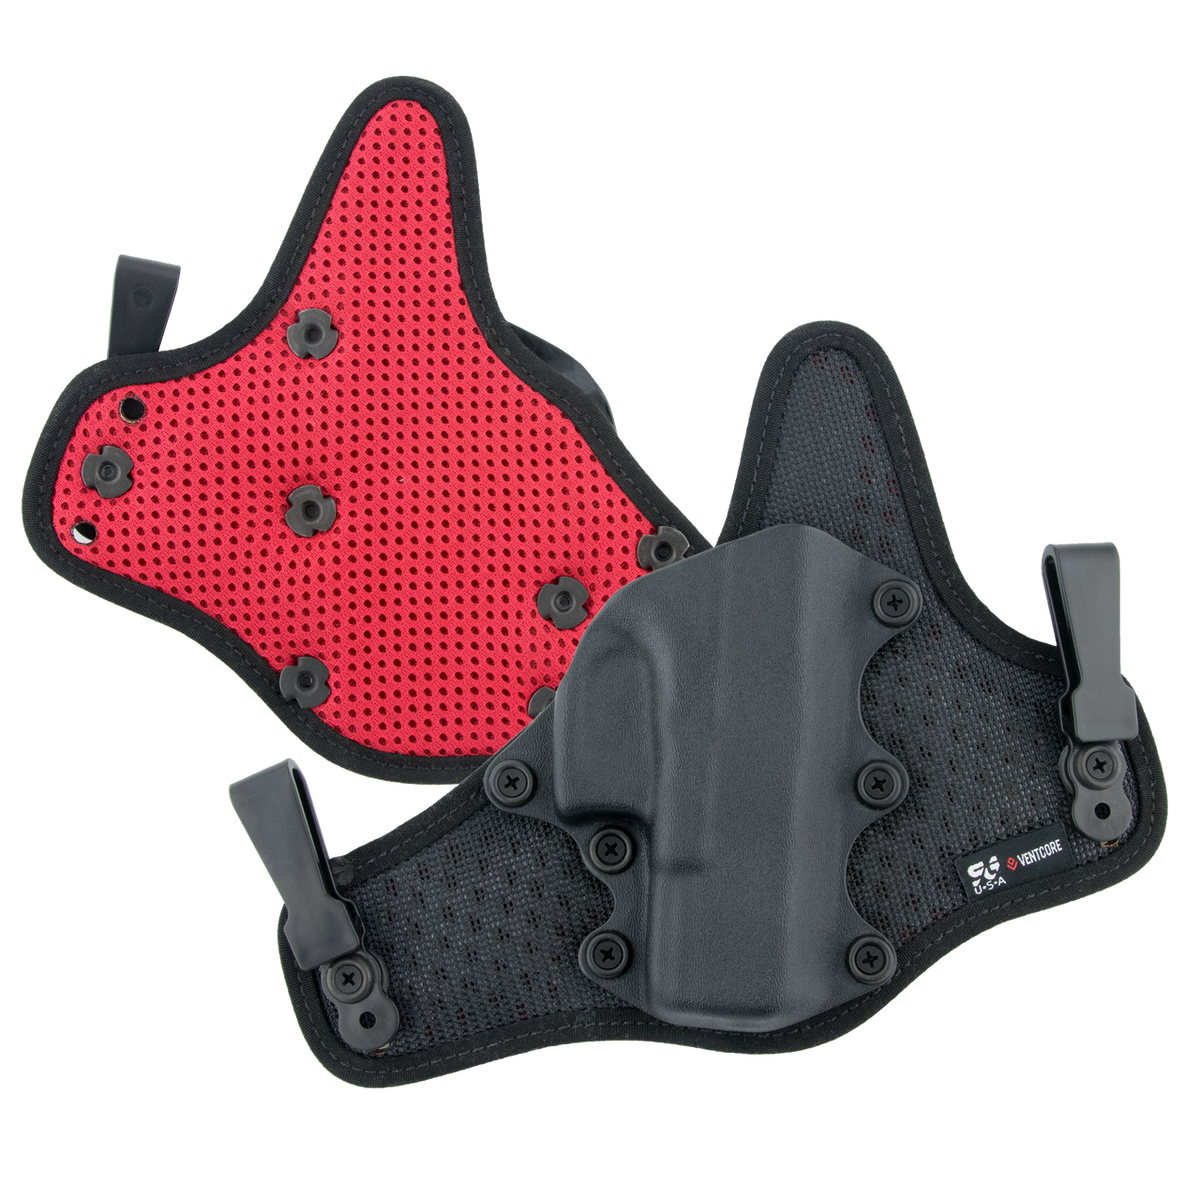 Stealth Gear Standard Ventcore Holster for Glock 26/27/33 with TLR-6 Weapon Light Holsters StealthGear Right Hand Tactical Gear Supplier Tactical Distributors Australia